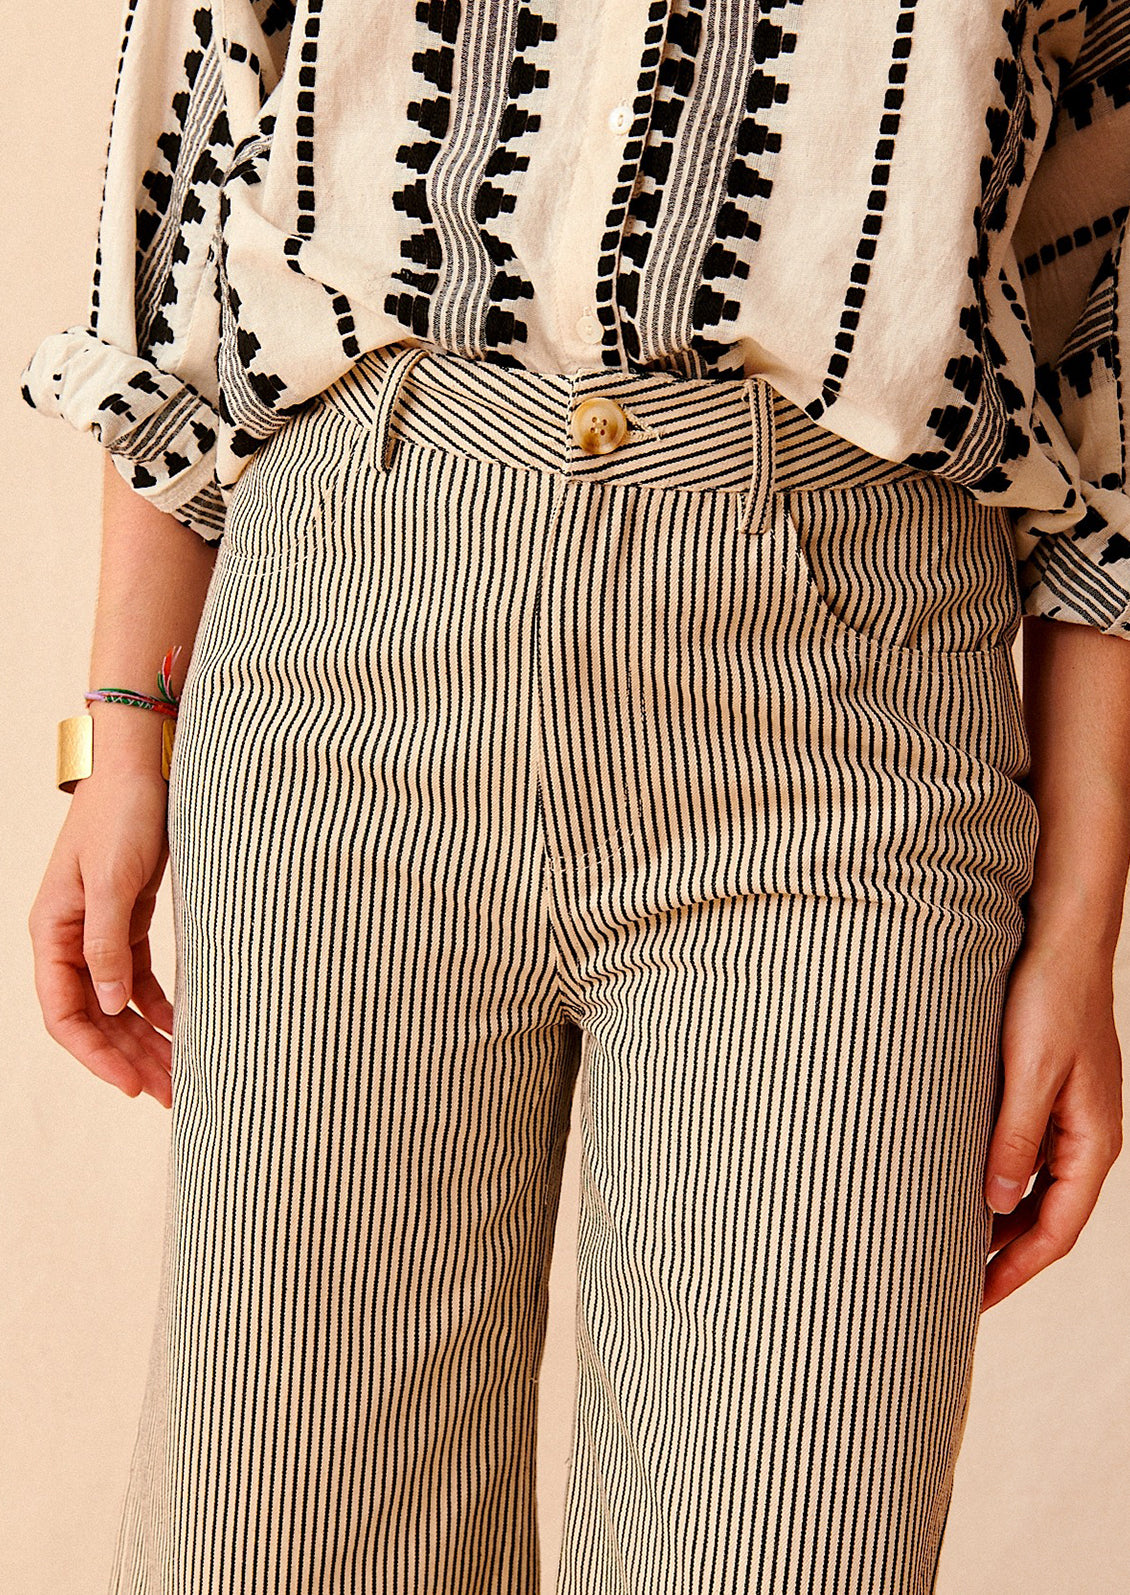 A woman wearing cream and black pinstriped jeans with detail of front